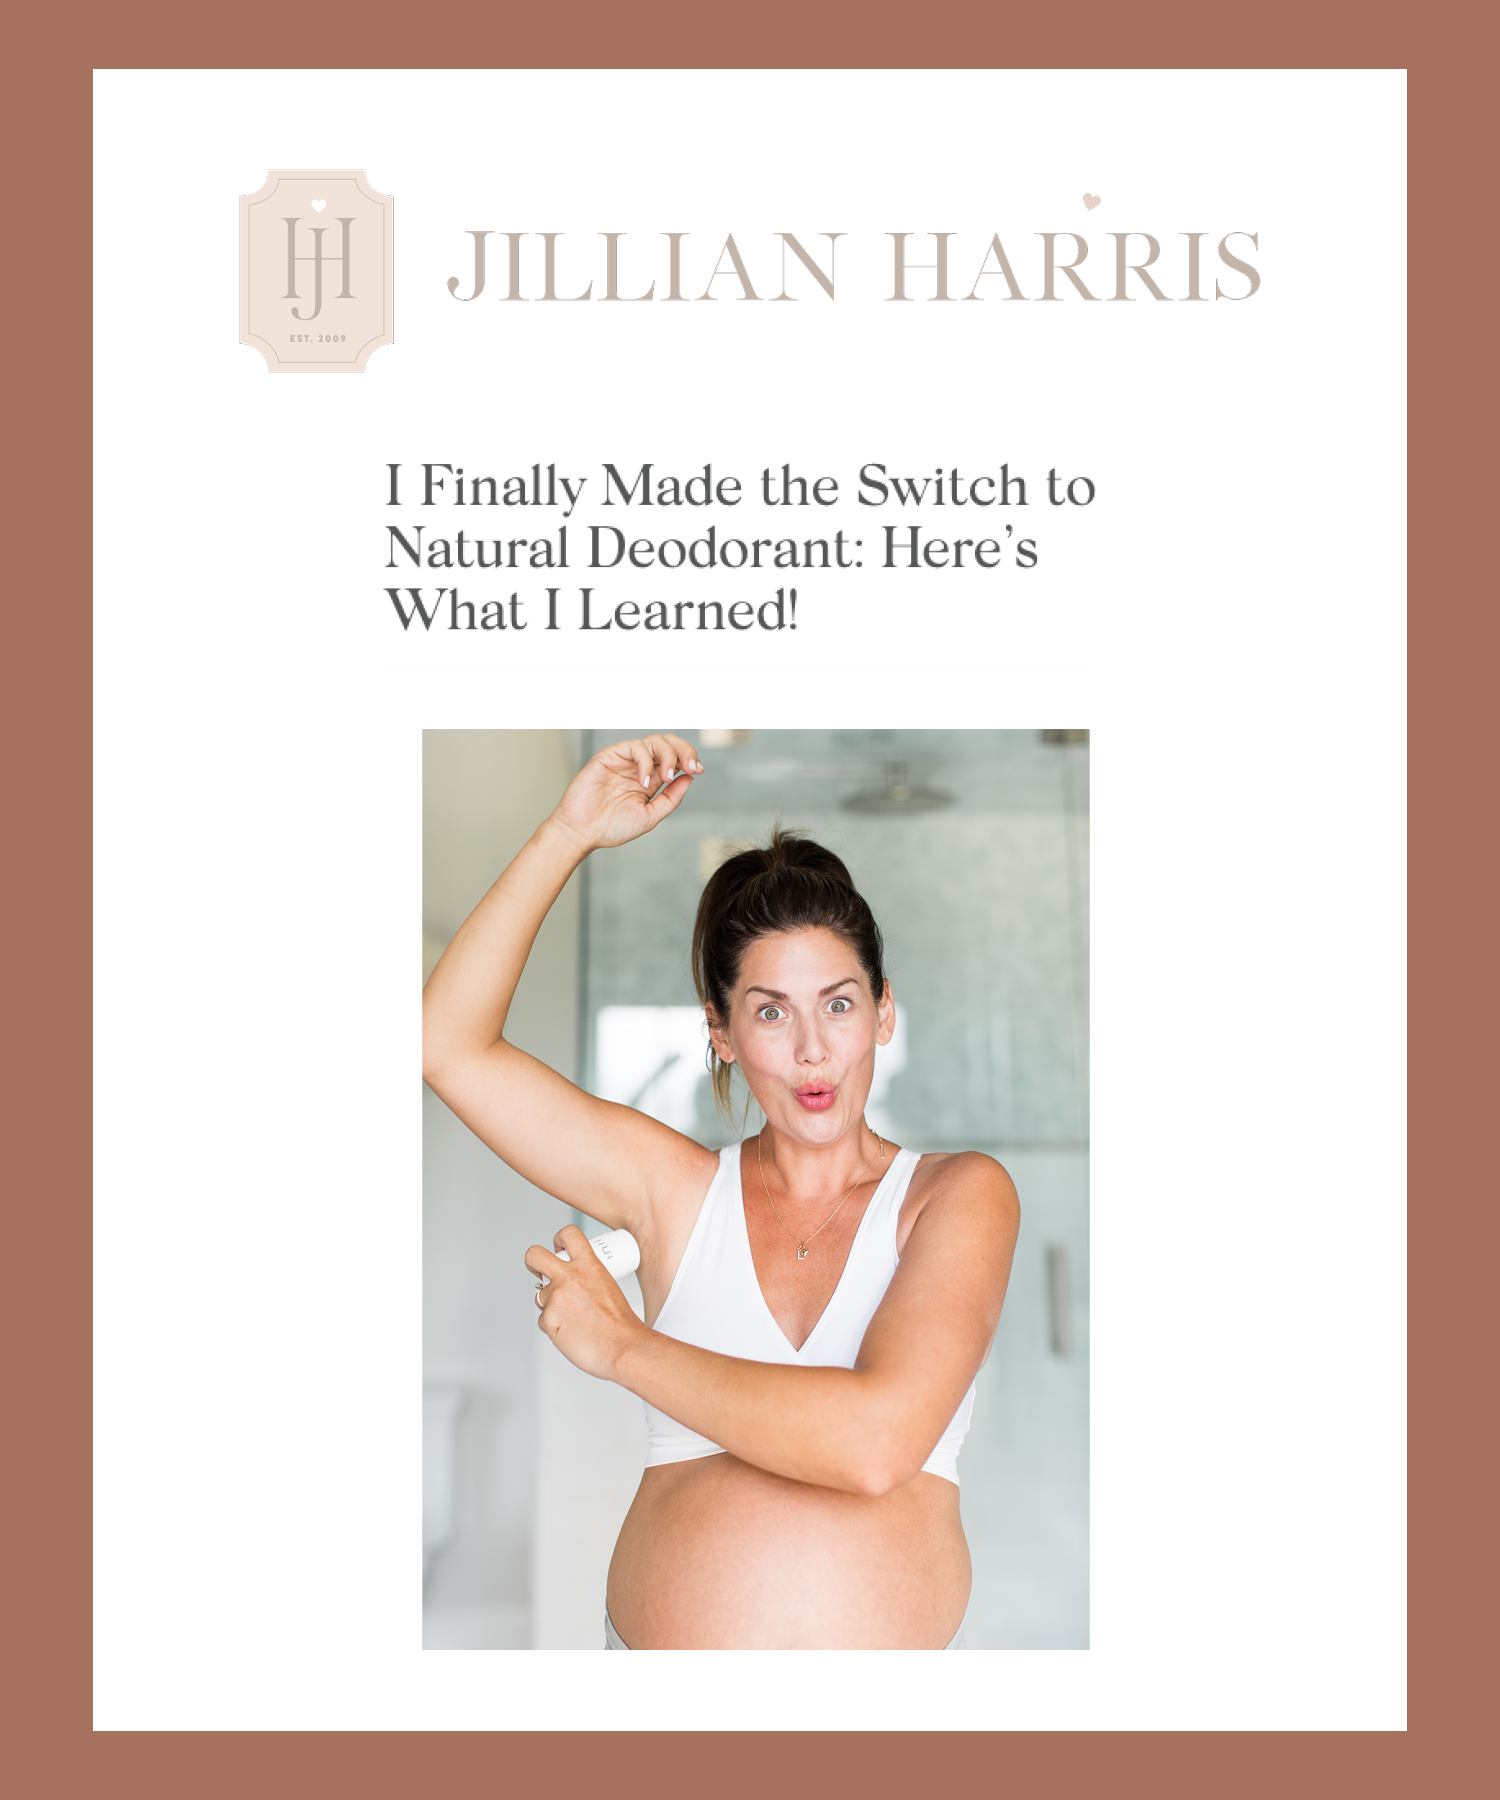 Jillian Harris: I Finally Made the Switch to Natural Deodorant: Here’s What I Learned!